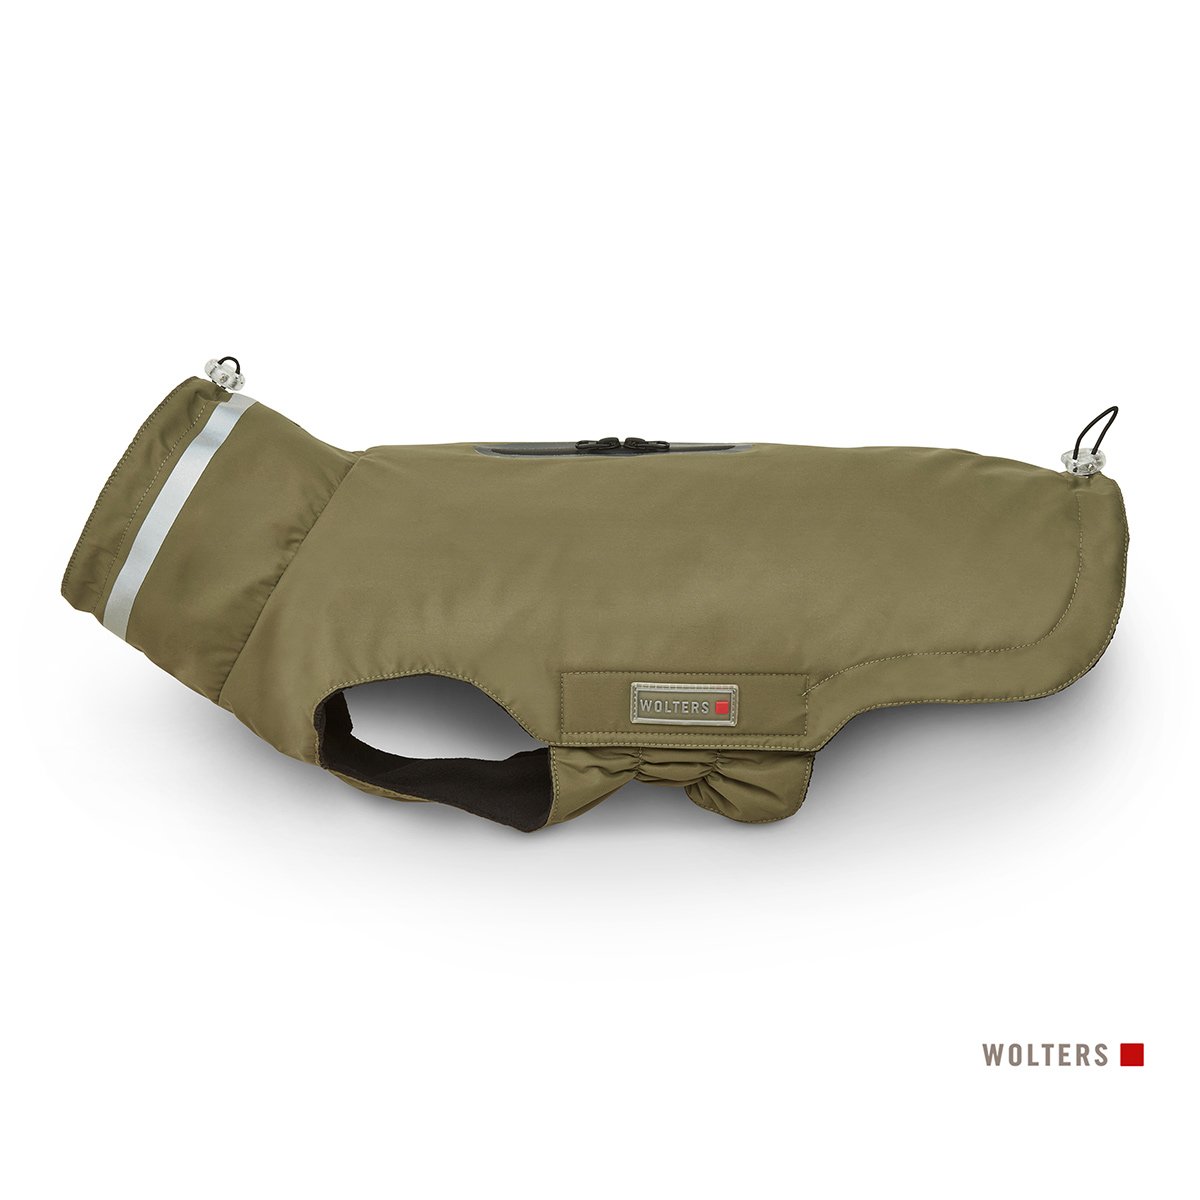 Wolters Outdoorjacke Modern Classic olive 30 cm von Wolters Cat&Dog